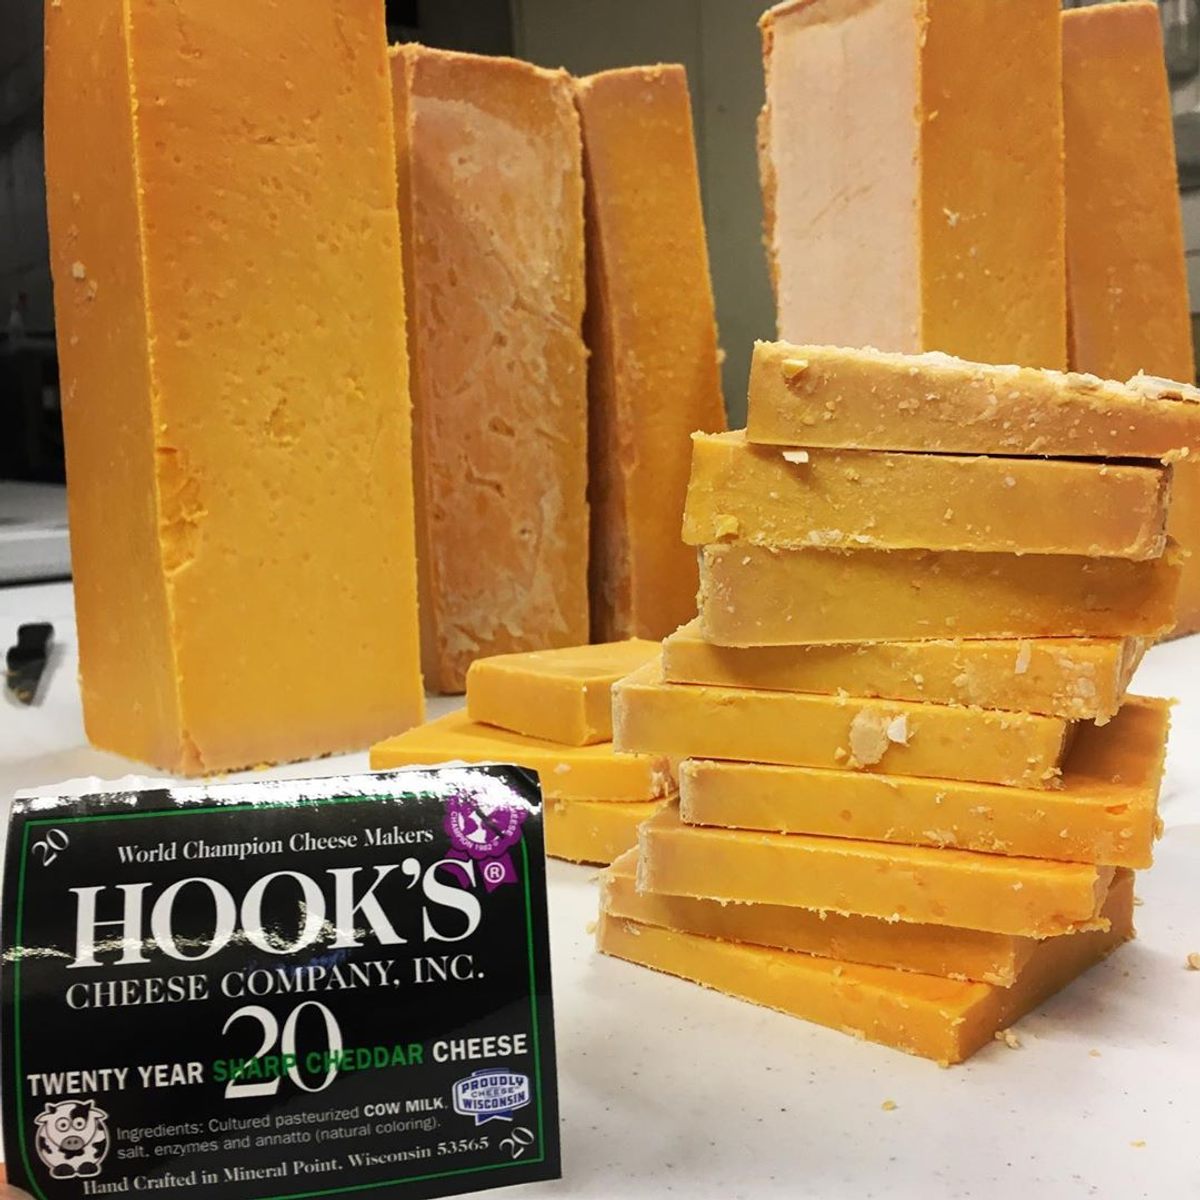 Hook's Cheese $209-per-pound, 20-year cheddar is on the way